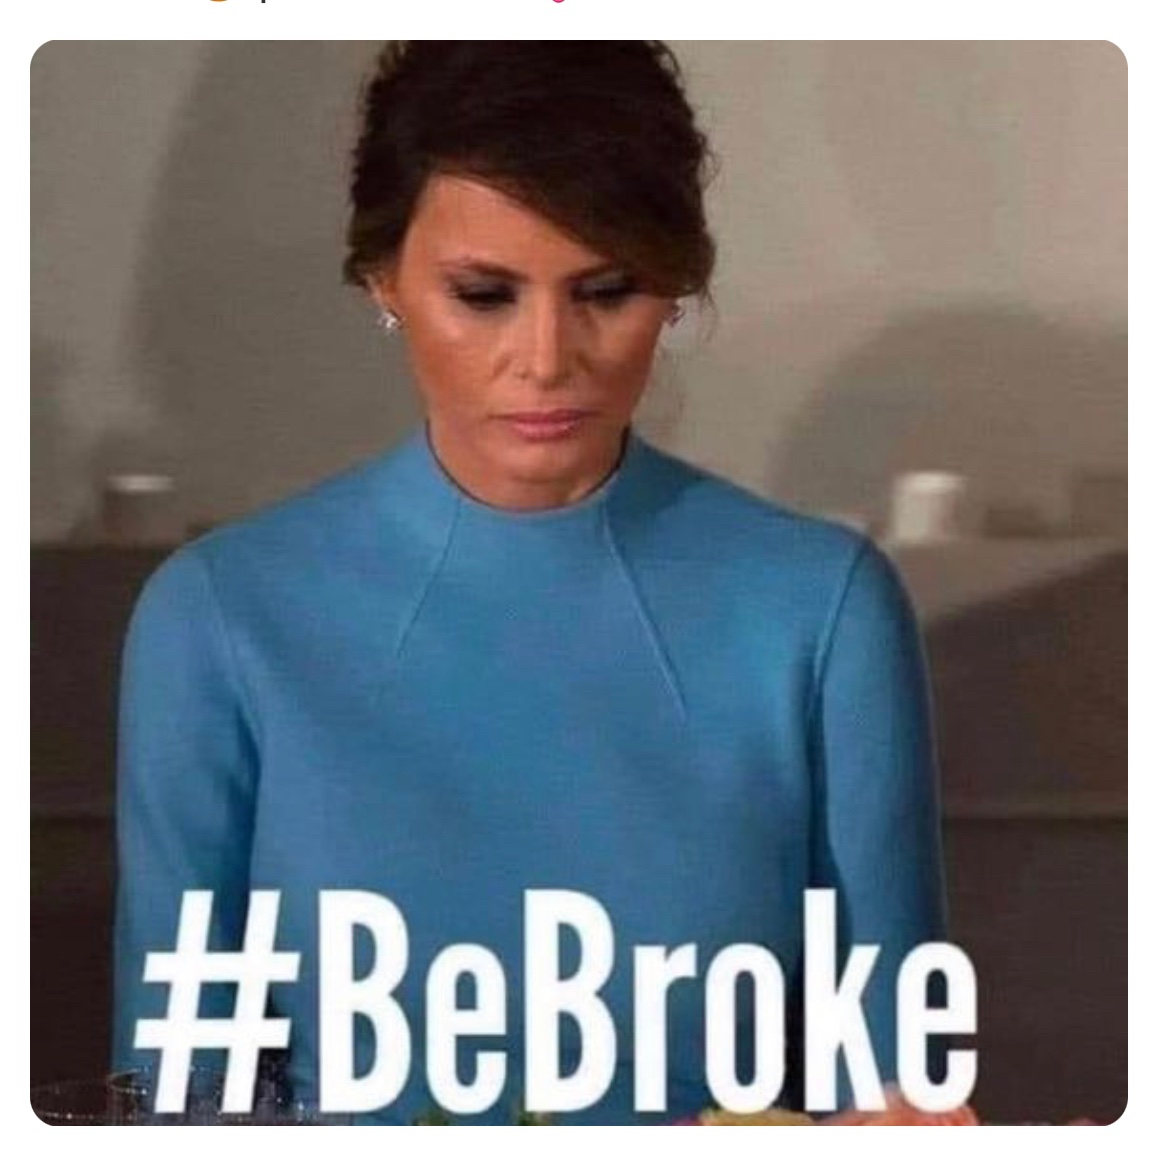 $83.3 Million …..a word from Melania